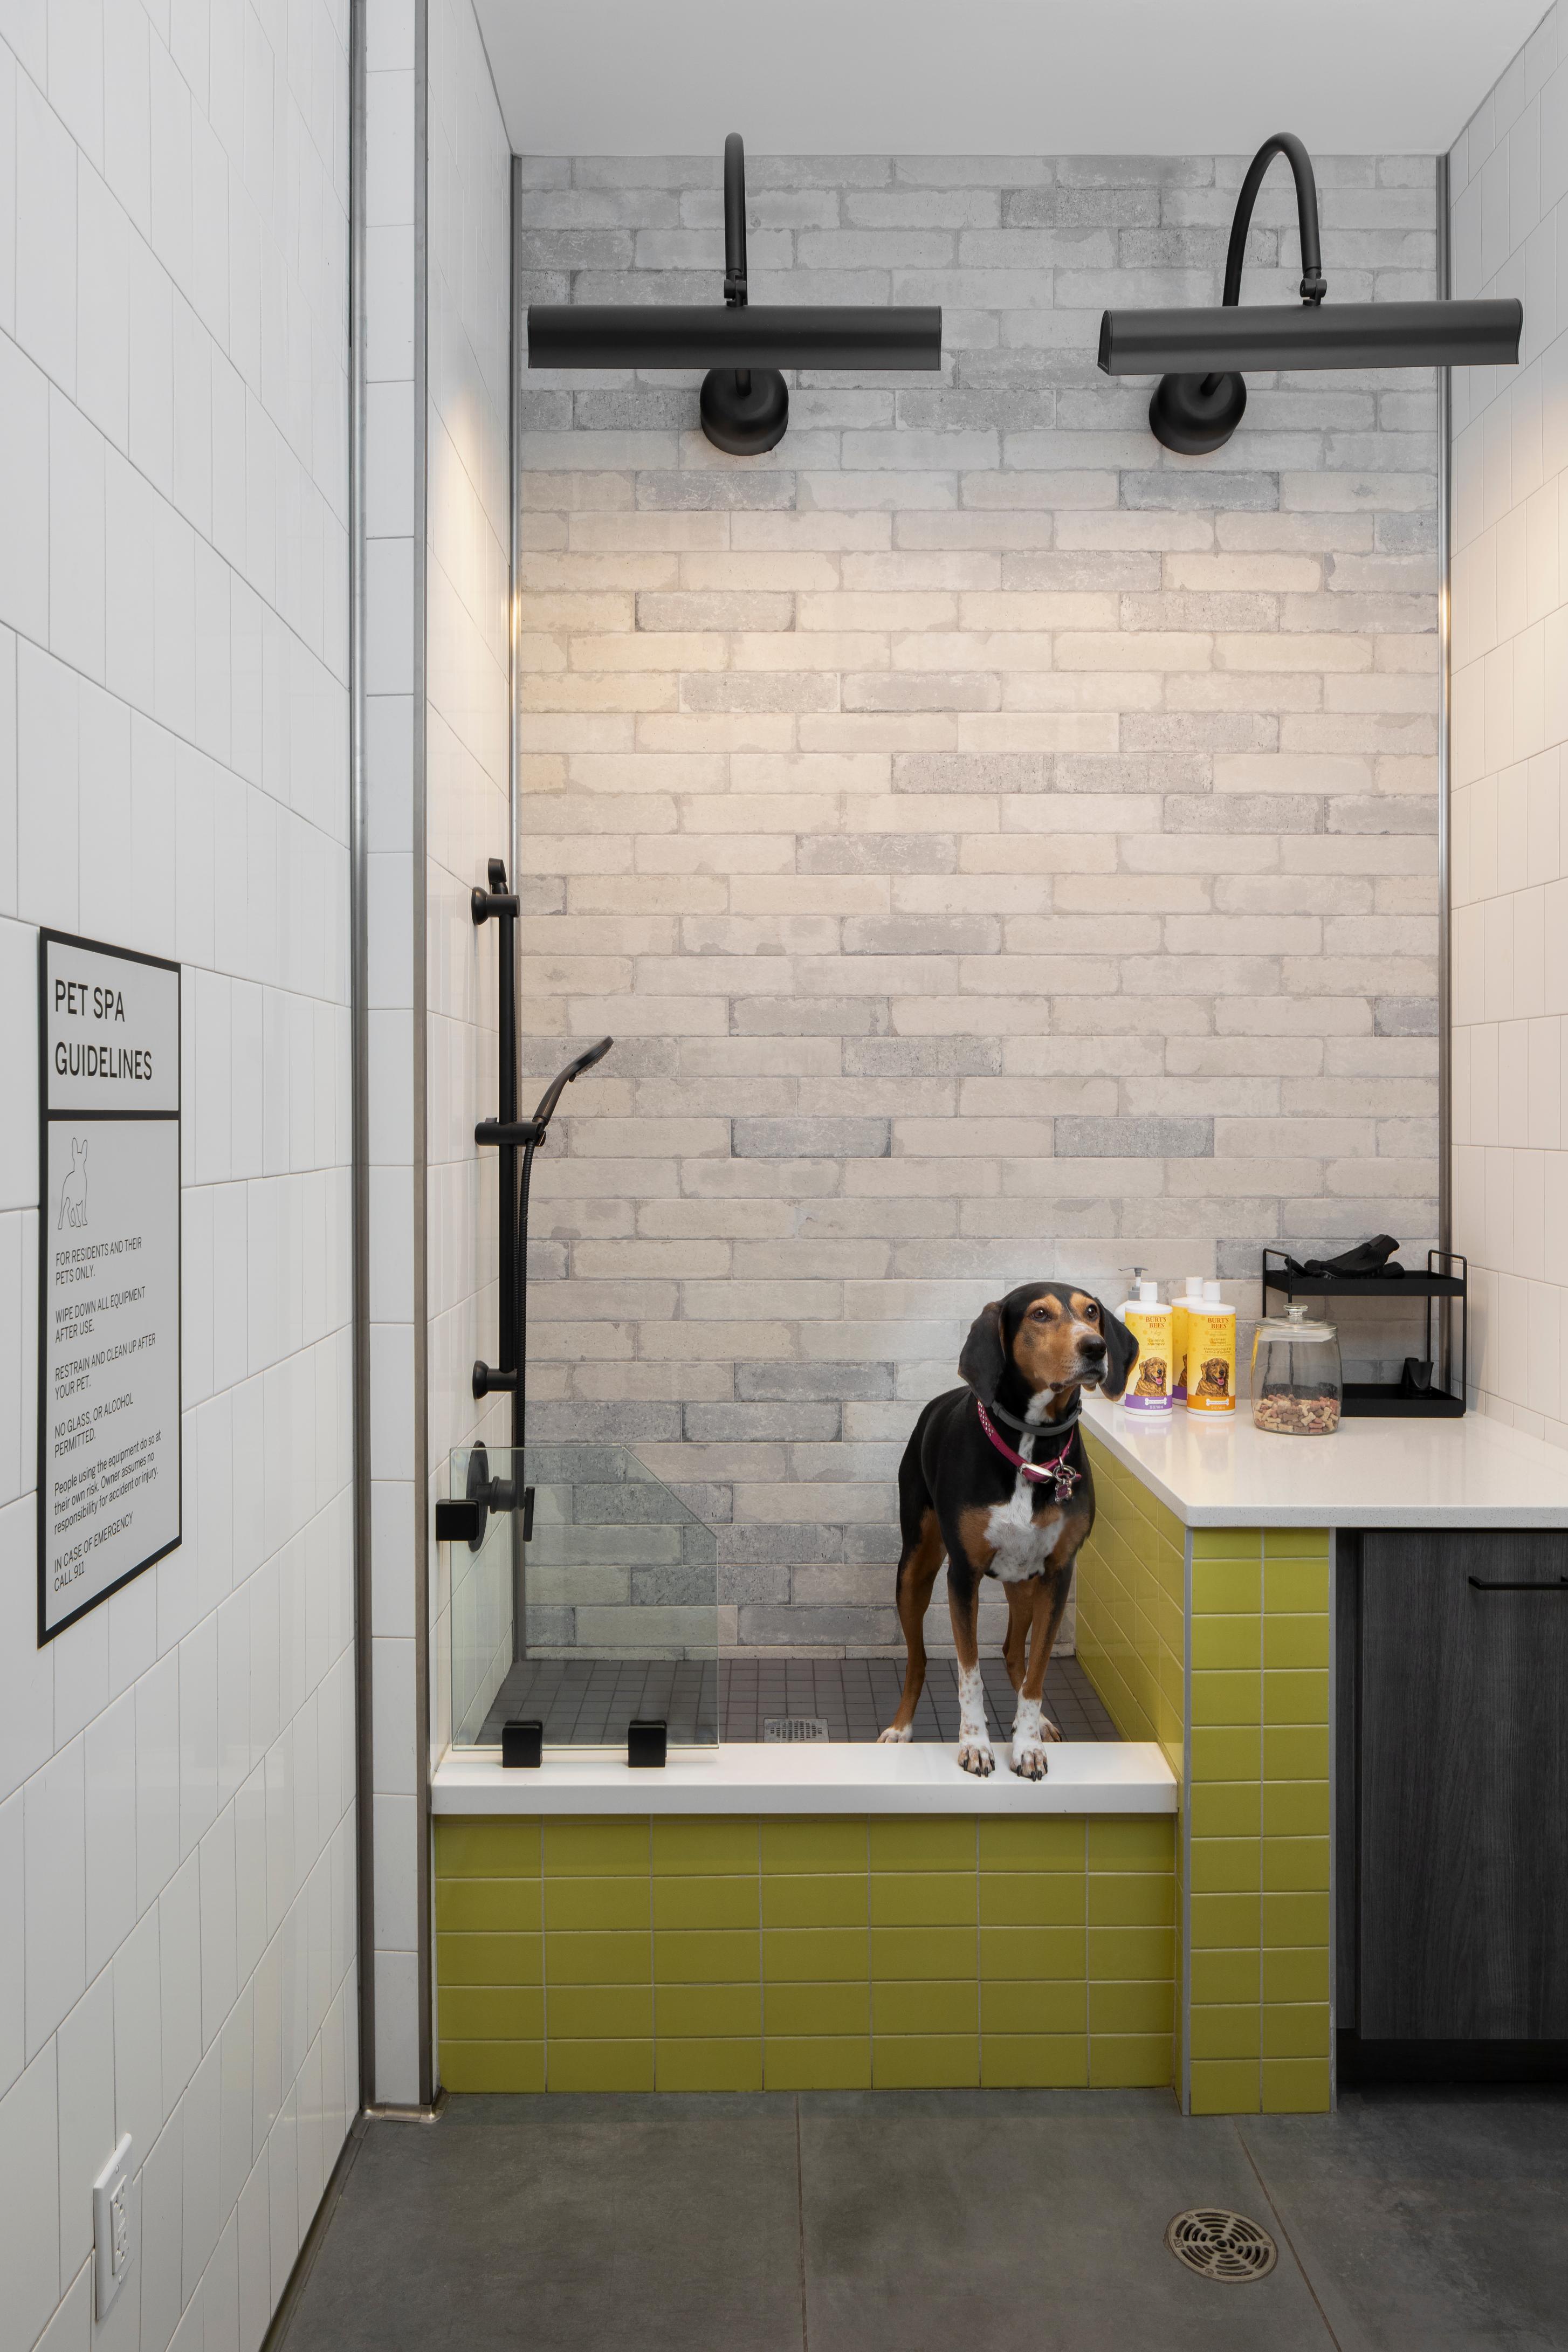 Pet spa with dog in the shower